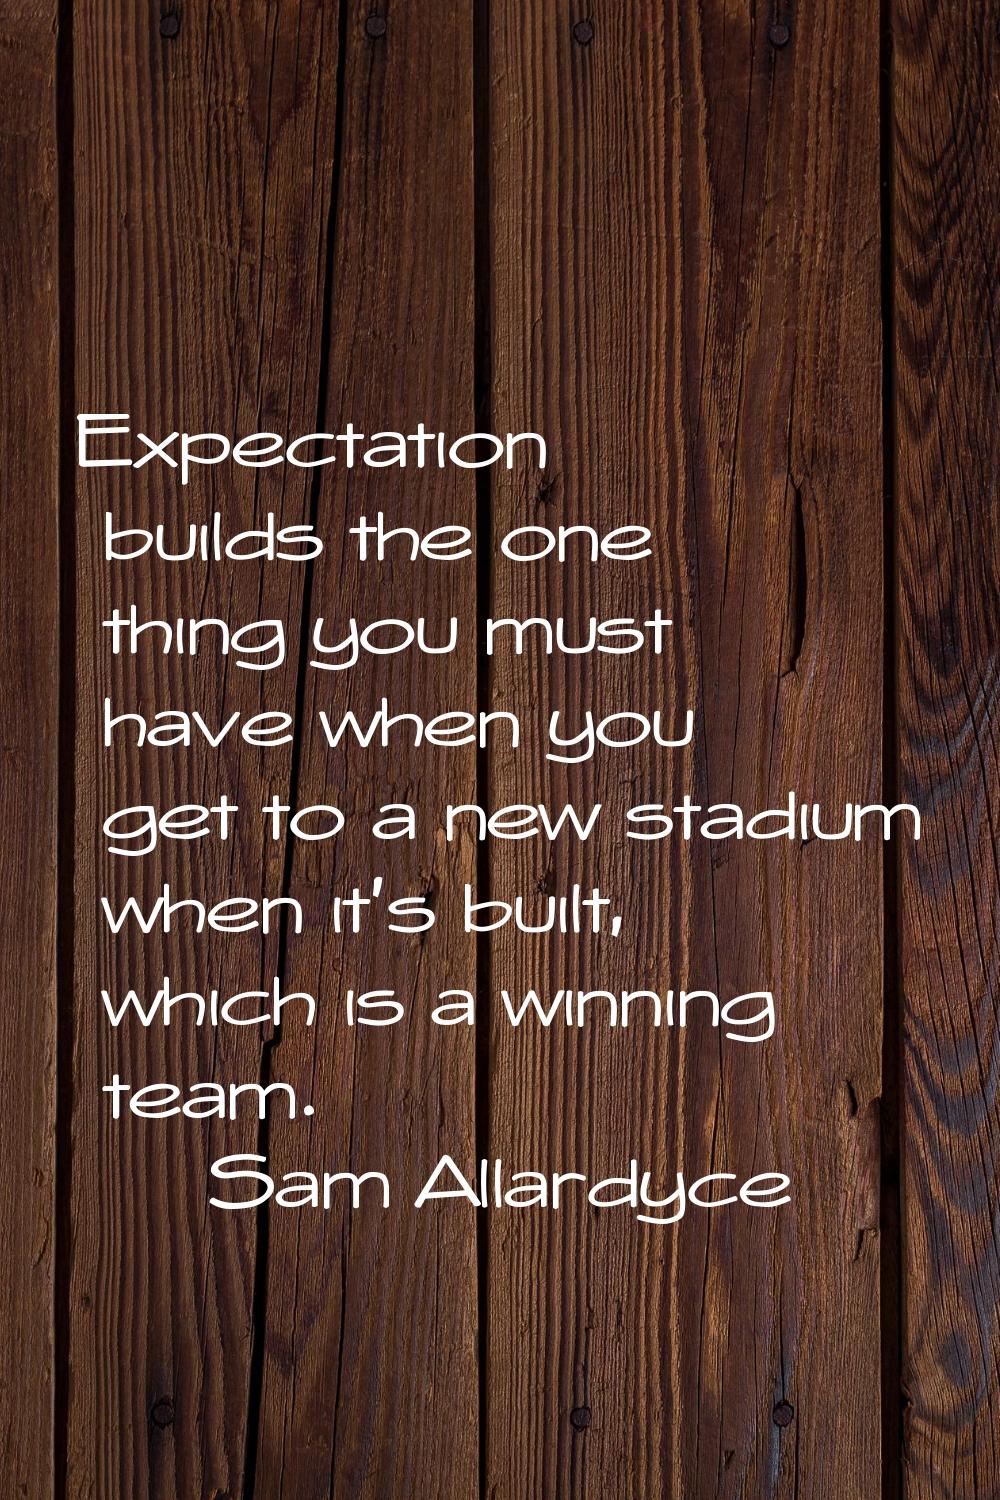 Expectation builds the one thing you must have when you get to a new stadium when it's built, which